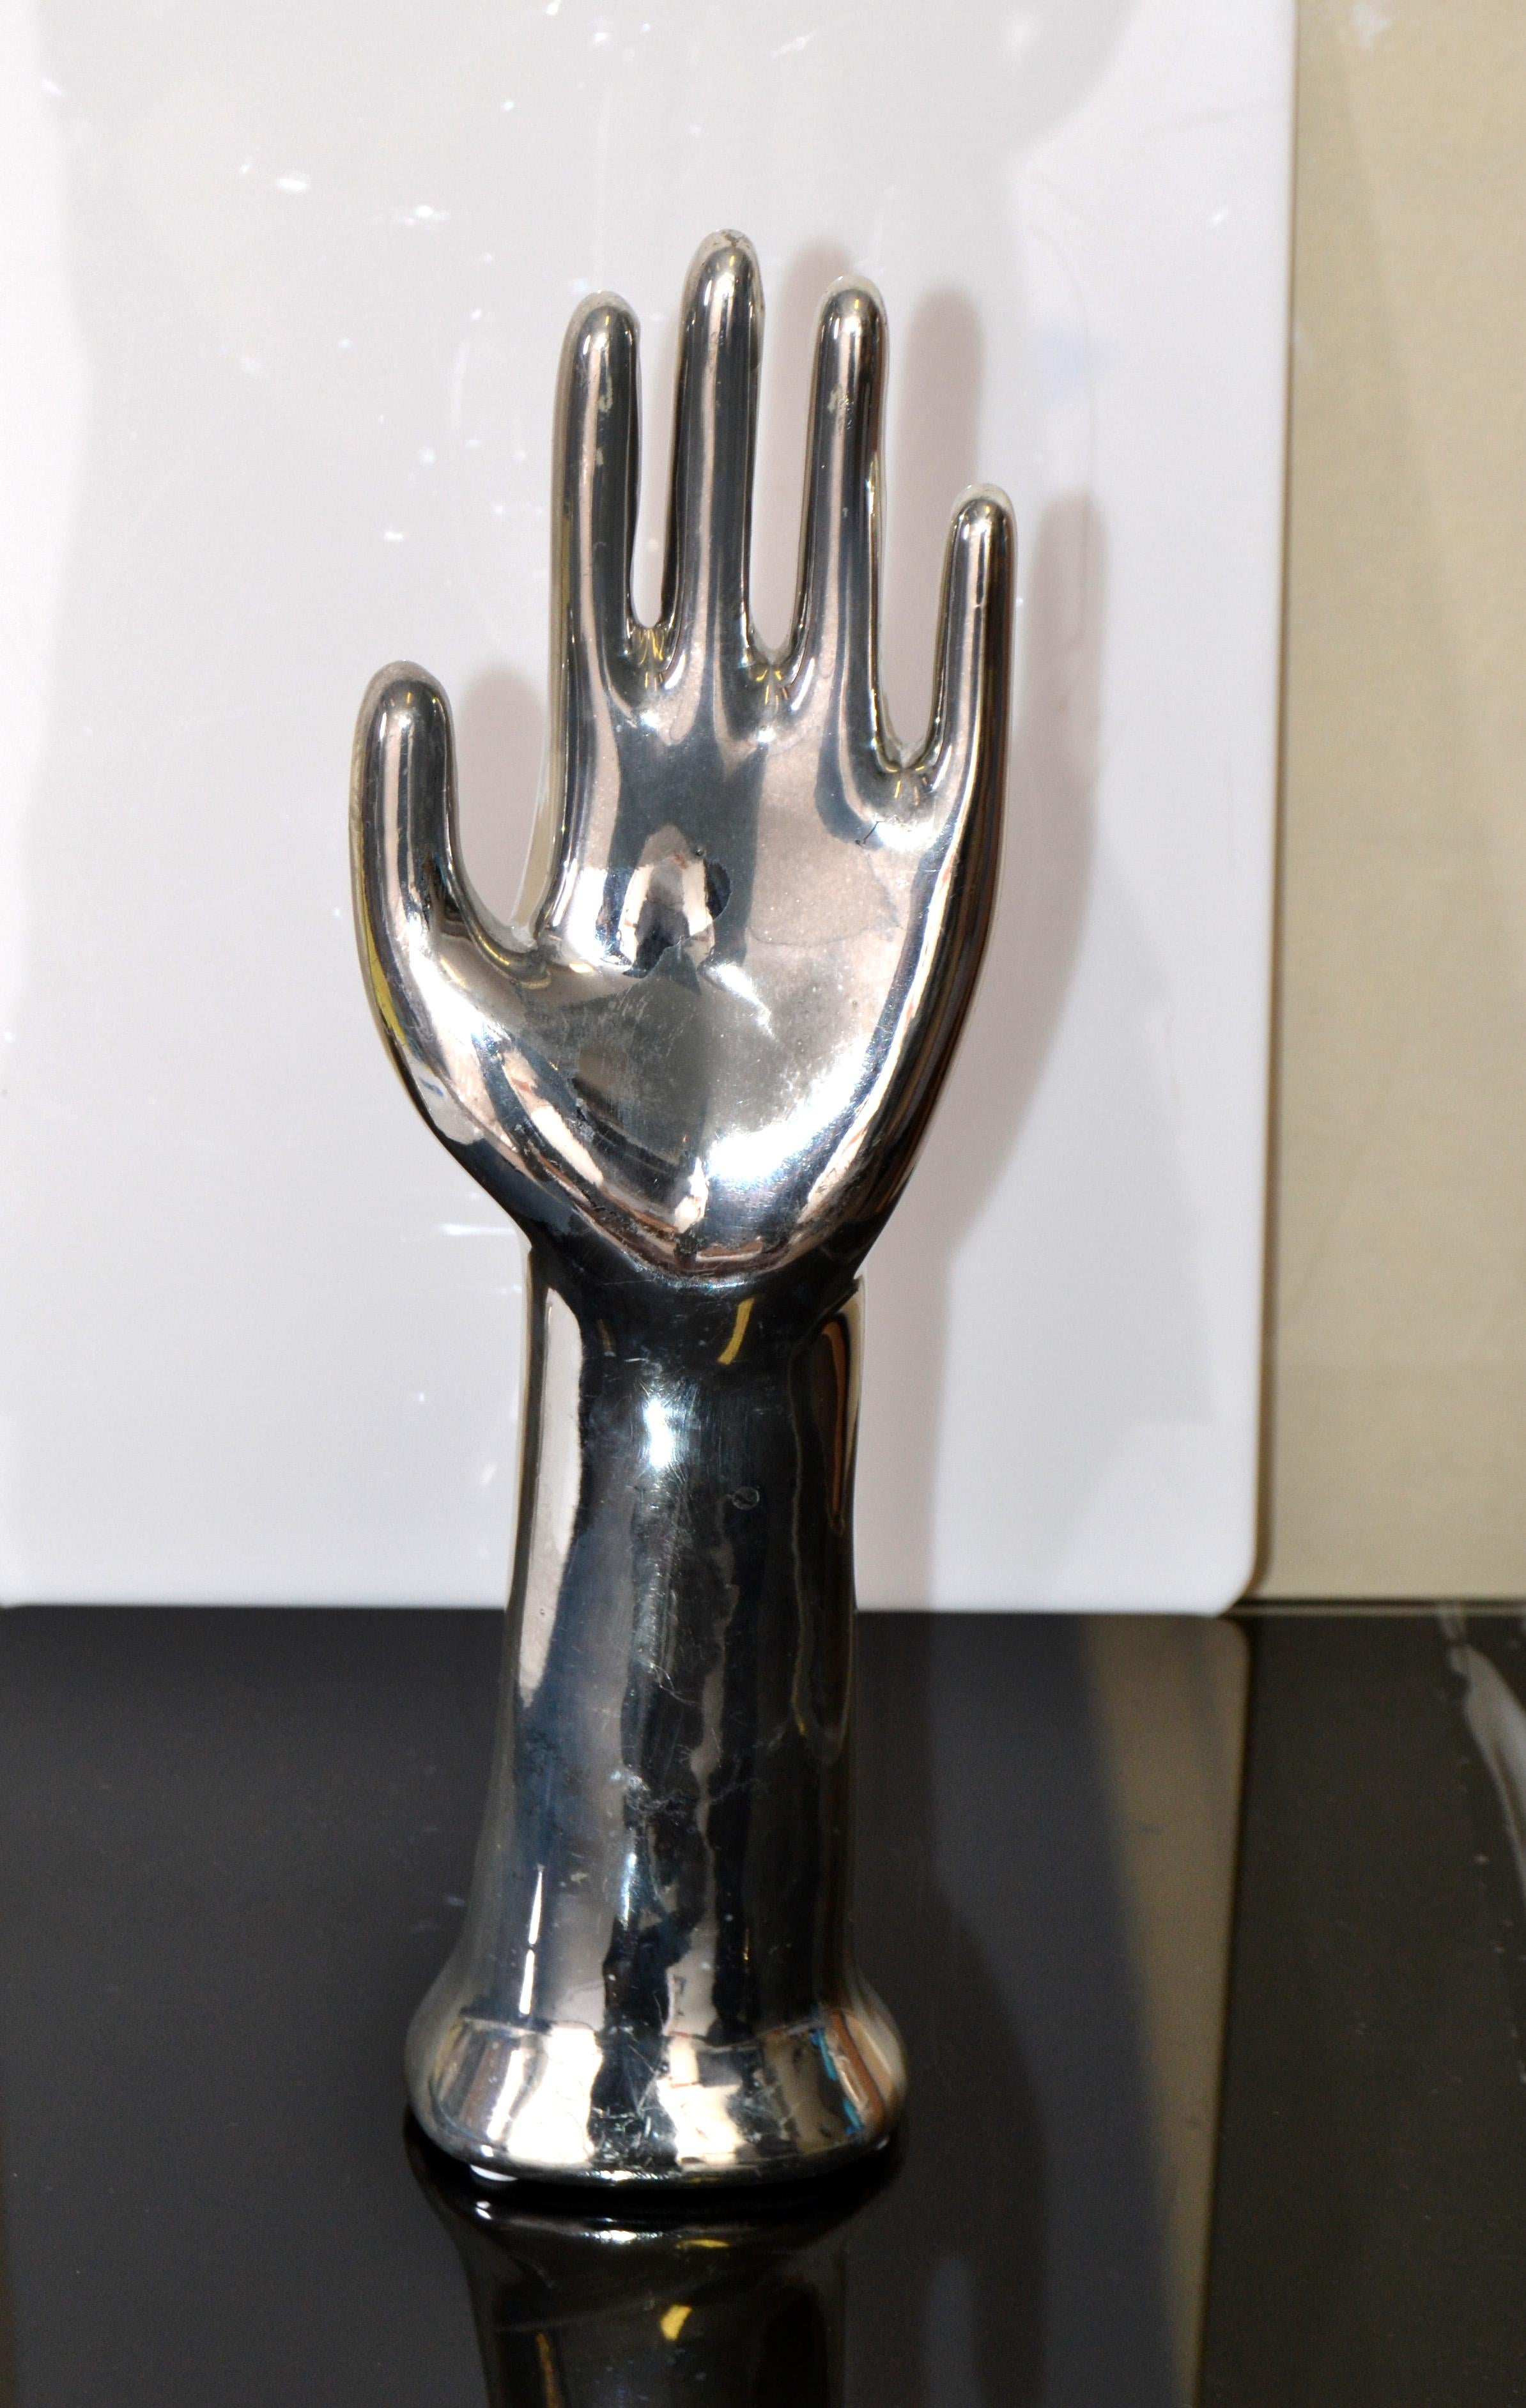 American Vintage Porcelain Hand Glove Mold Nickel Plated Jewelry Stand Sculpture 1970s For Sale